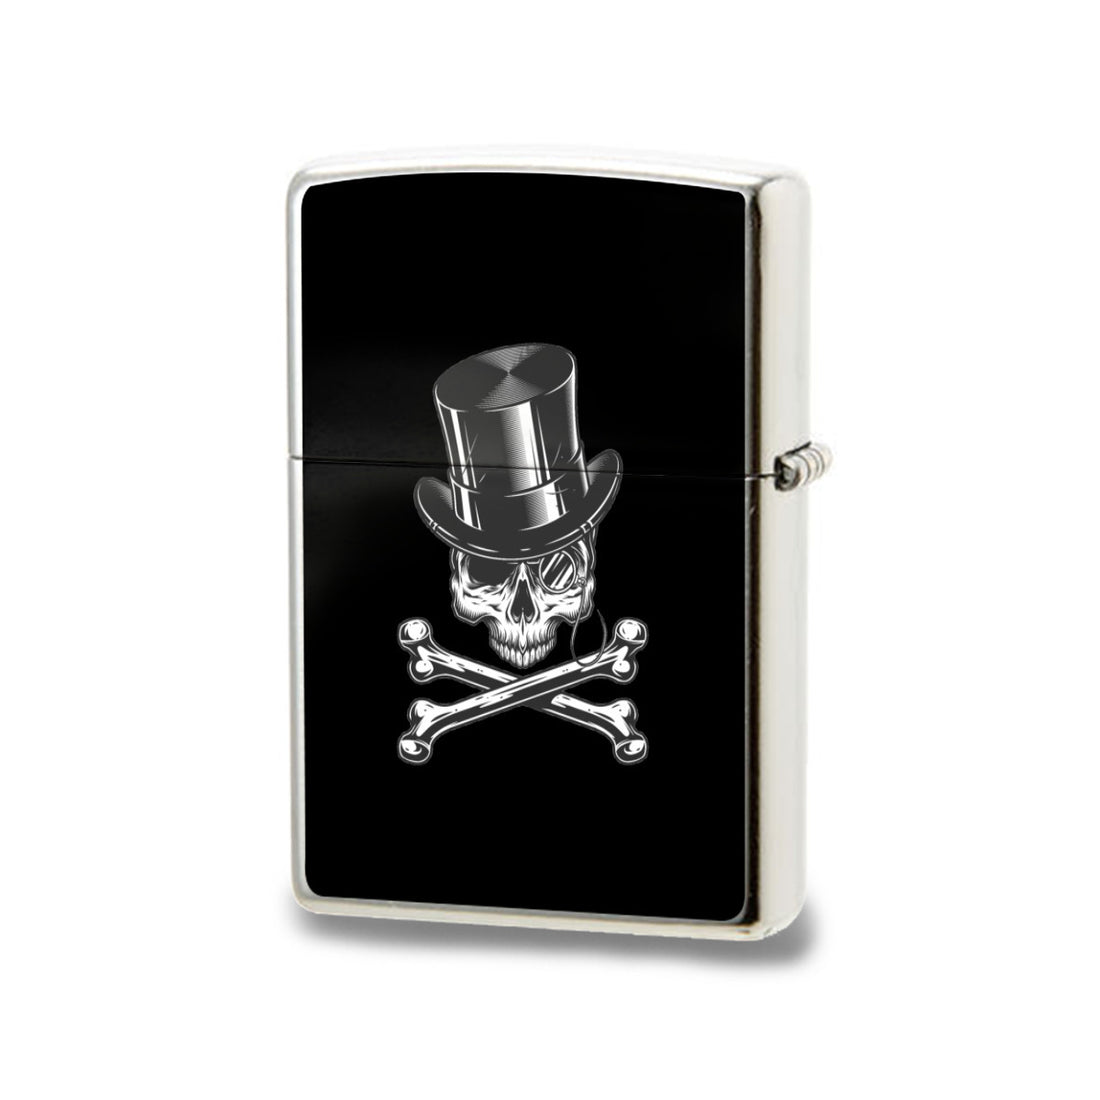 Skull Lighter Case｜ High quality aluminum Home-clothes-jewelry